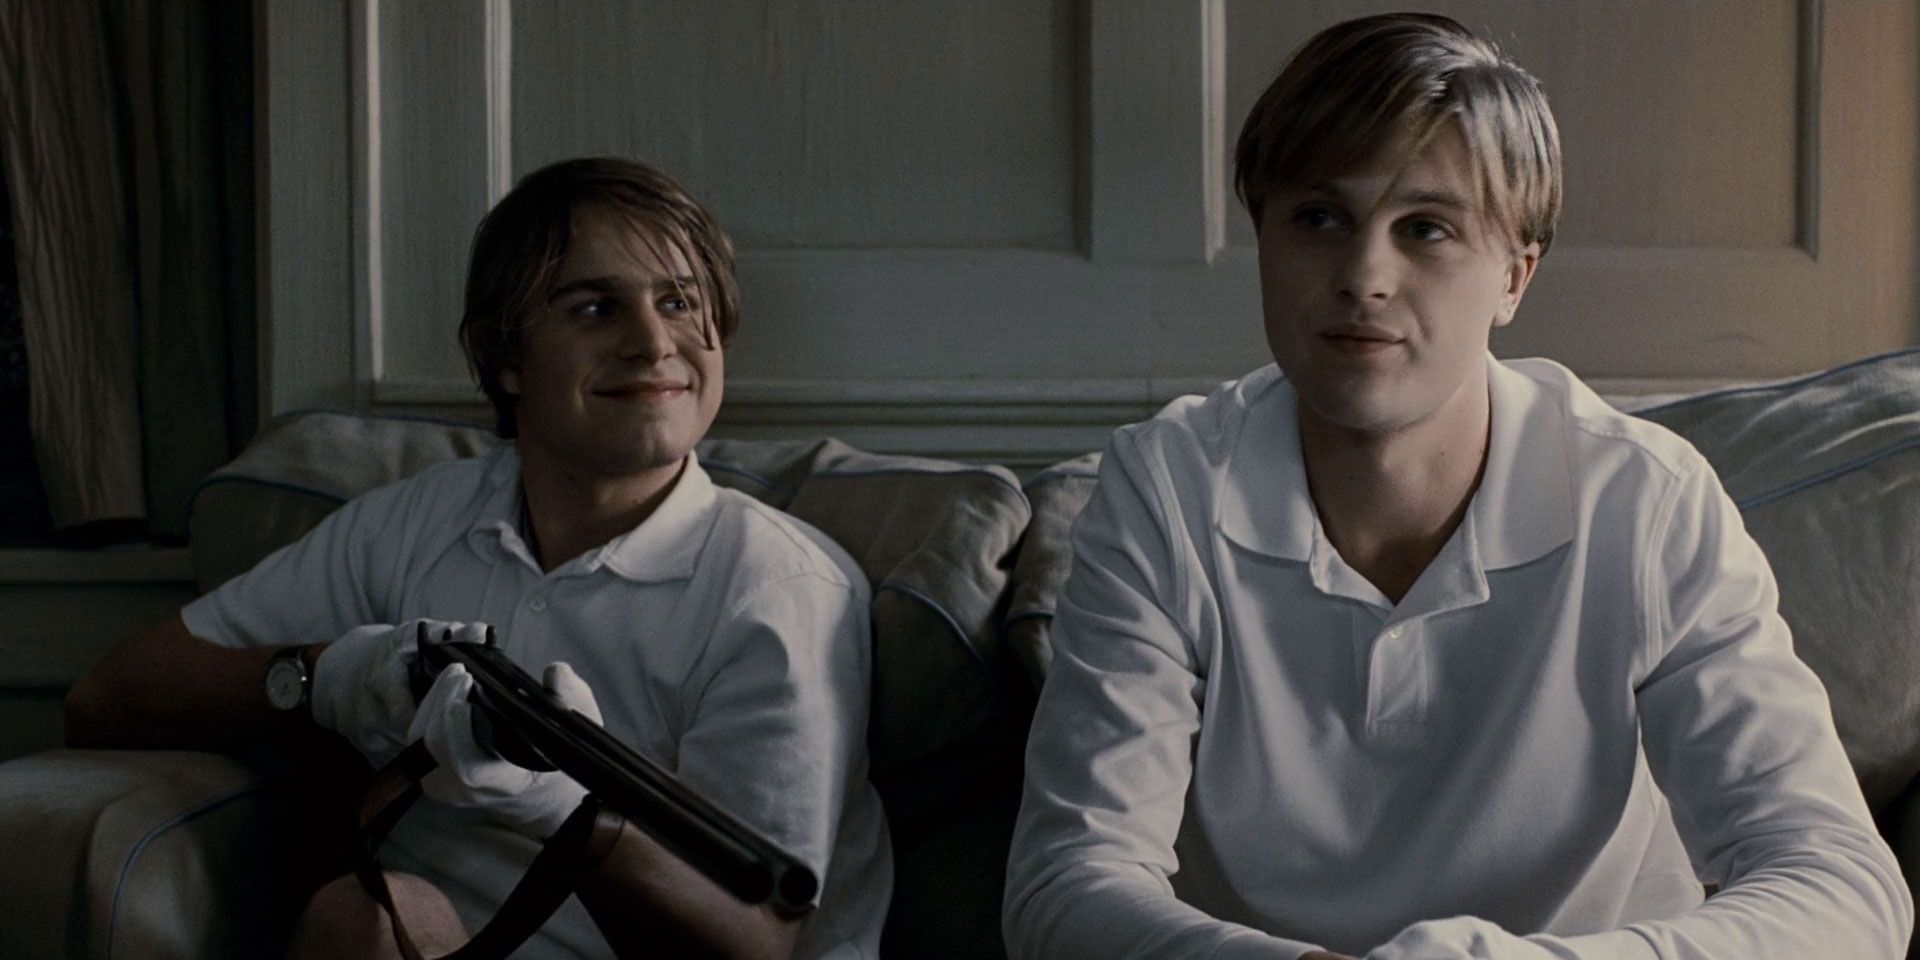 Brady Corbet and Michael Pitt sitting on the couch wearing white